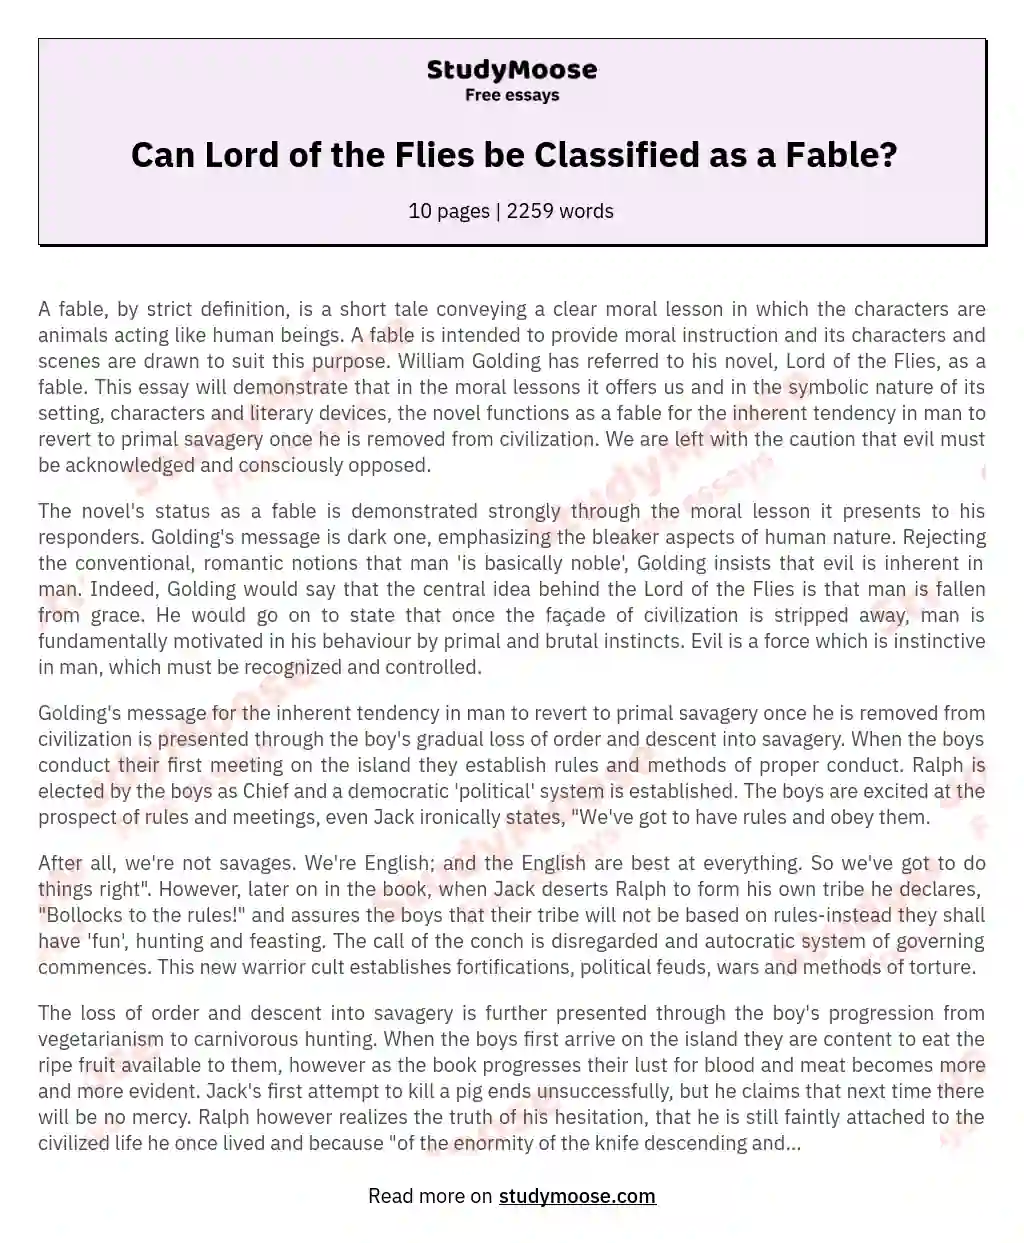 Can Lord of the Flies be Classified as a Fable? essay